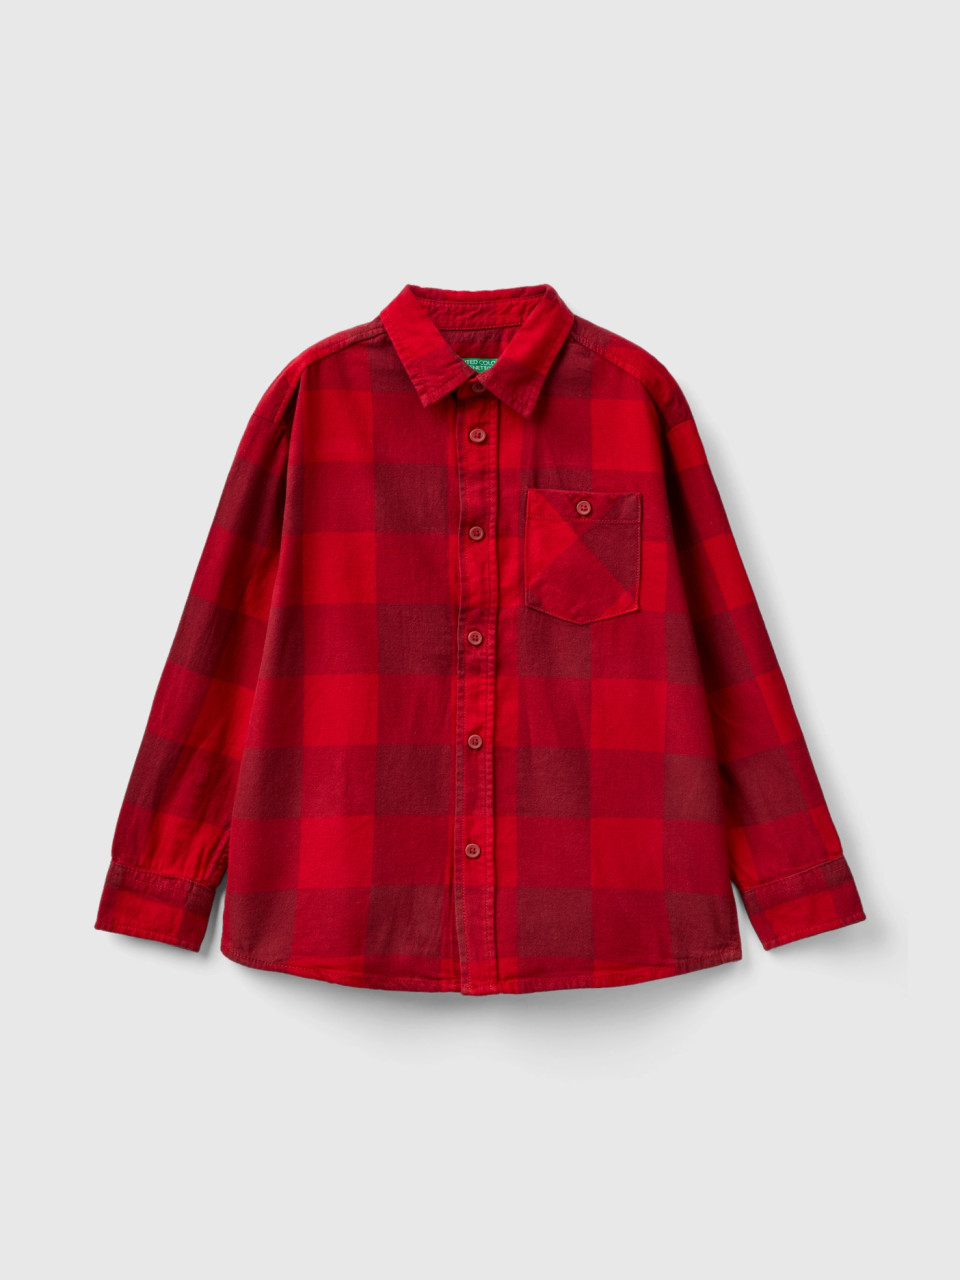 Benetton, Plaid Shirt In 100% Cotton, Red, Kids